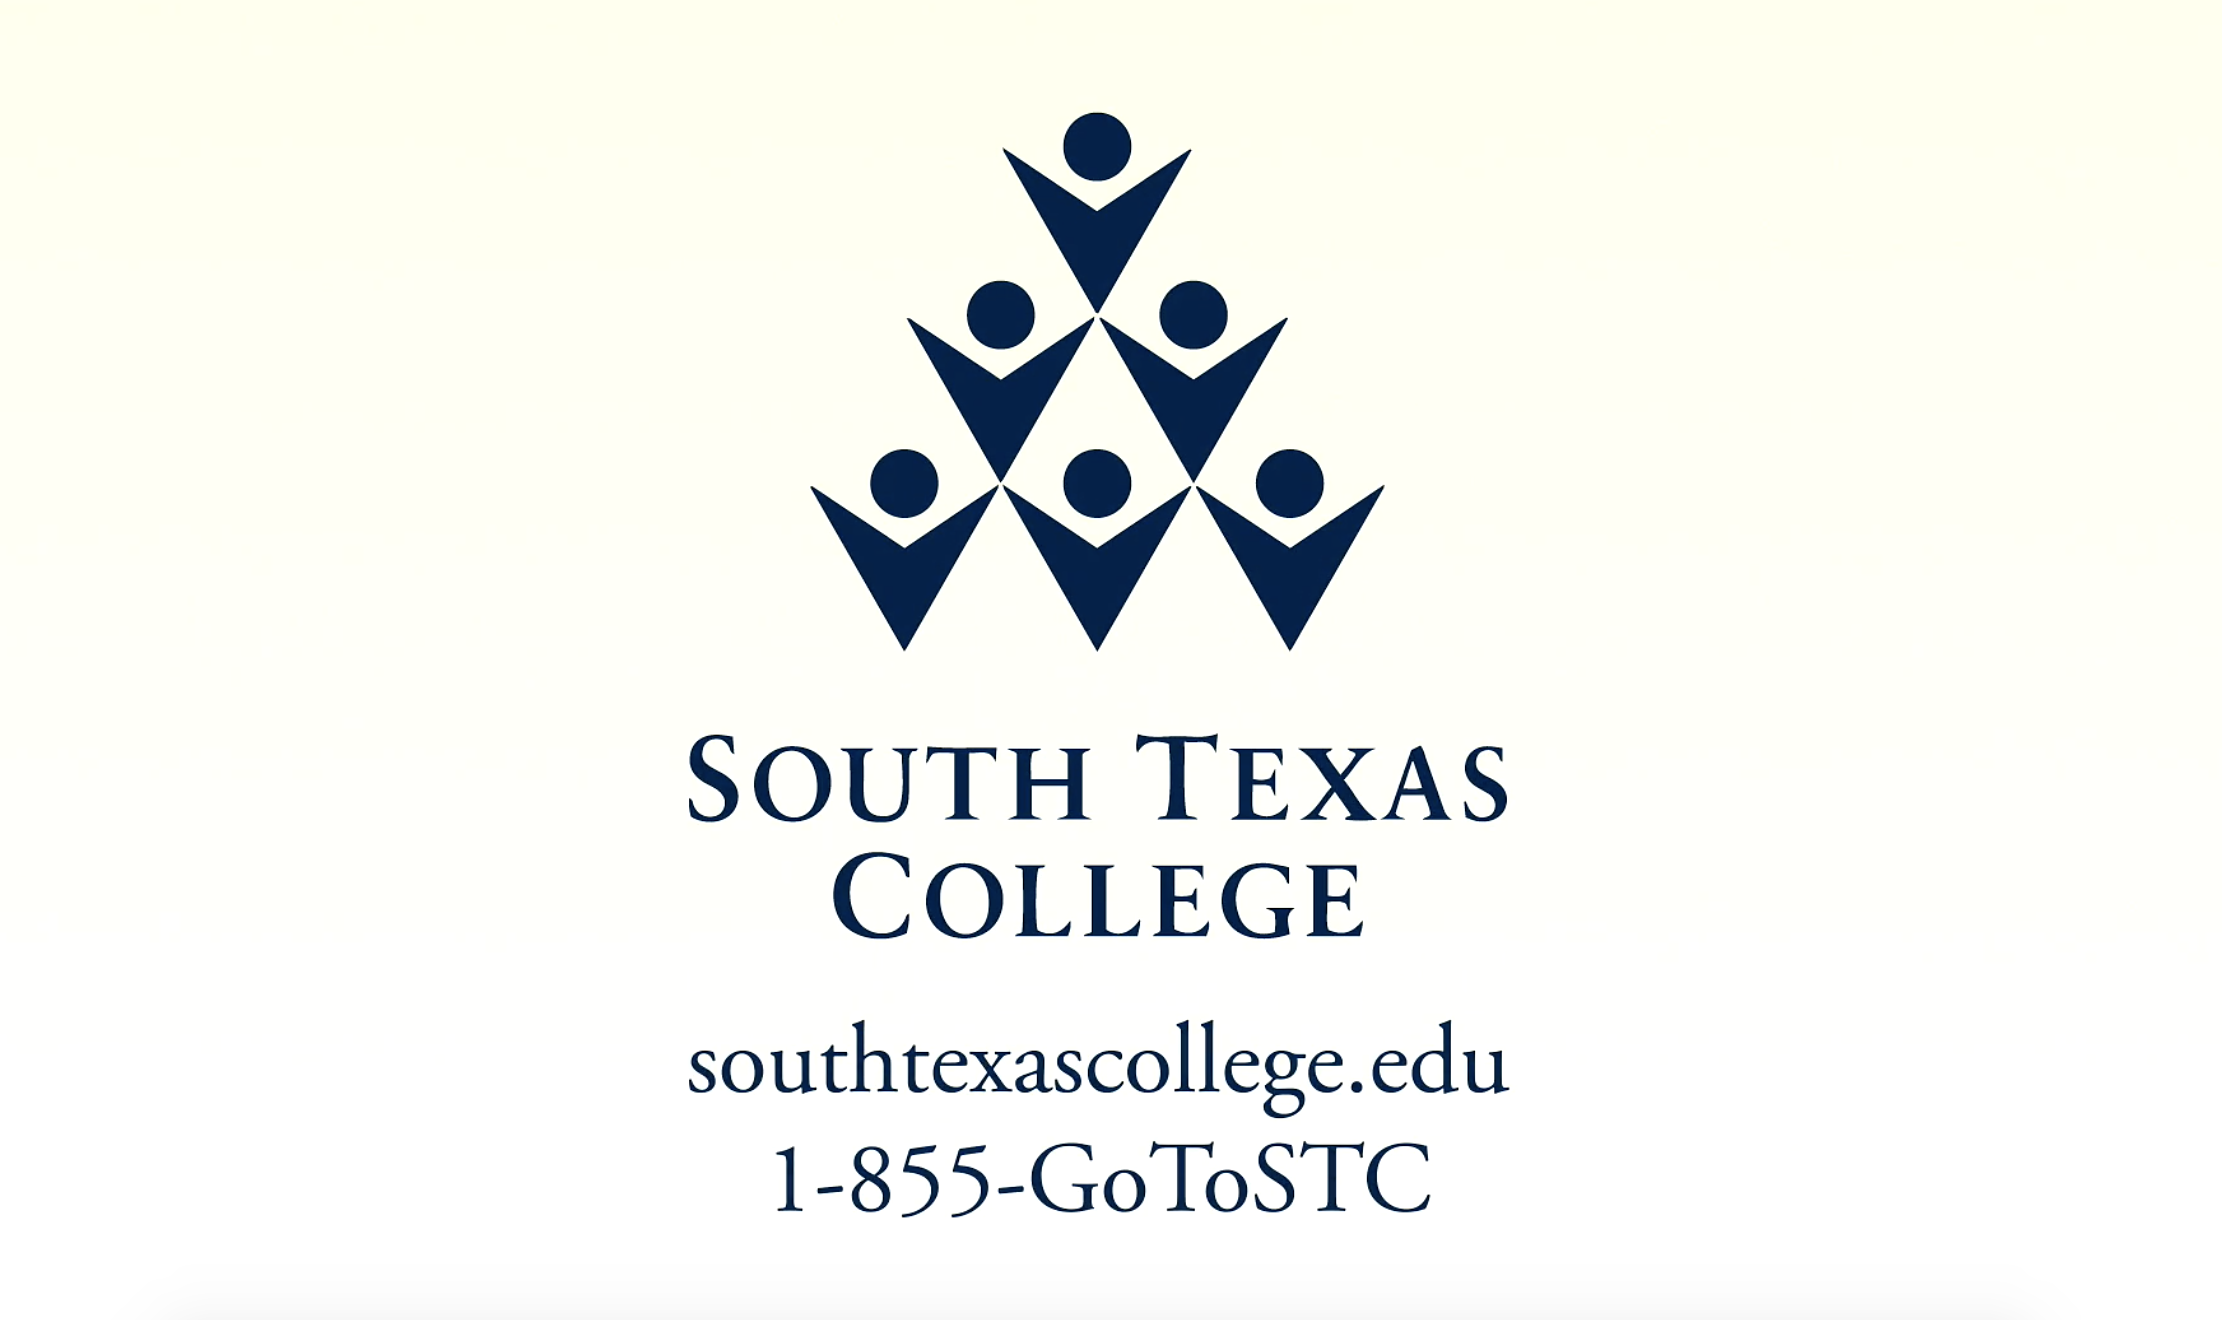 South Texas College